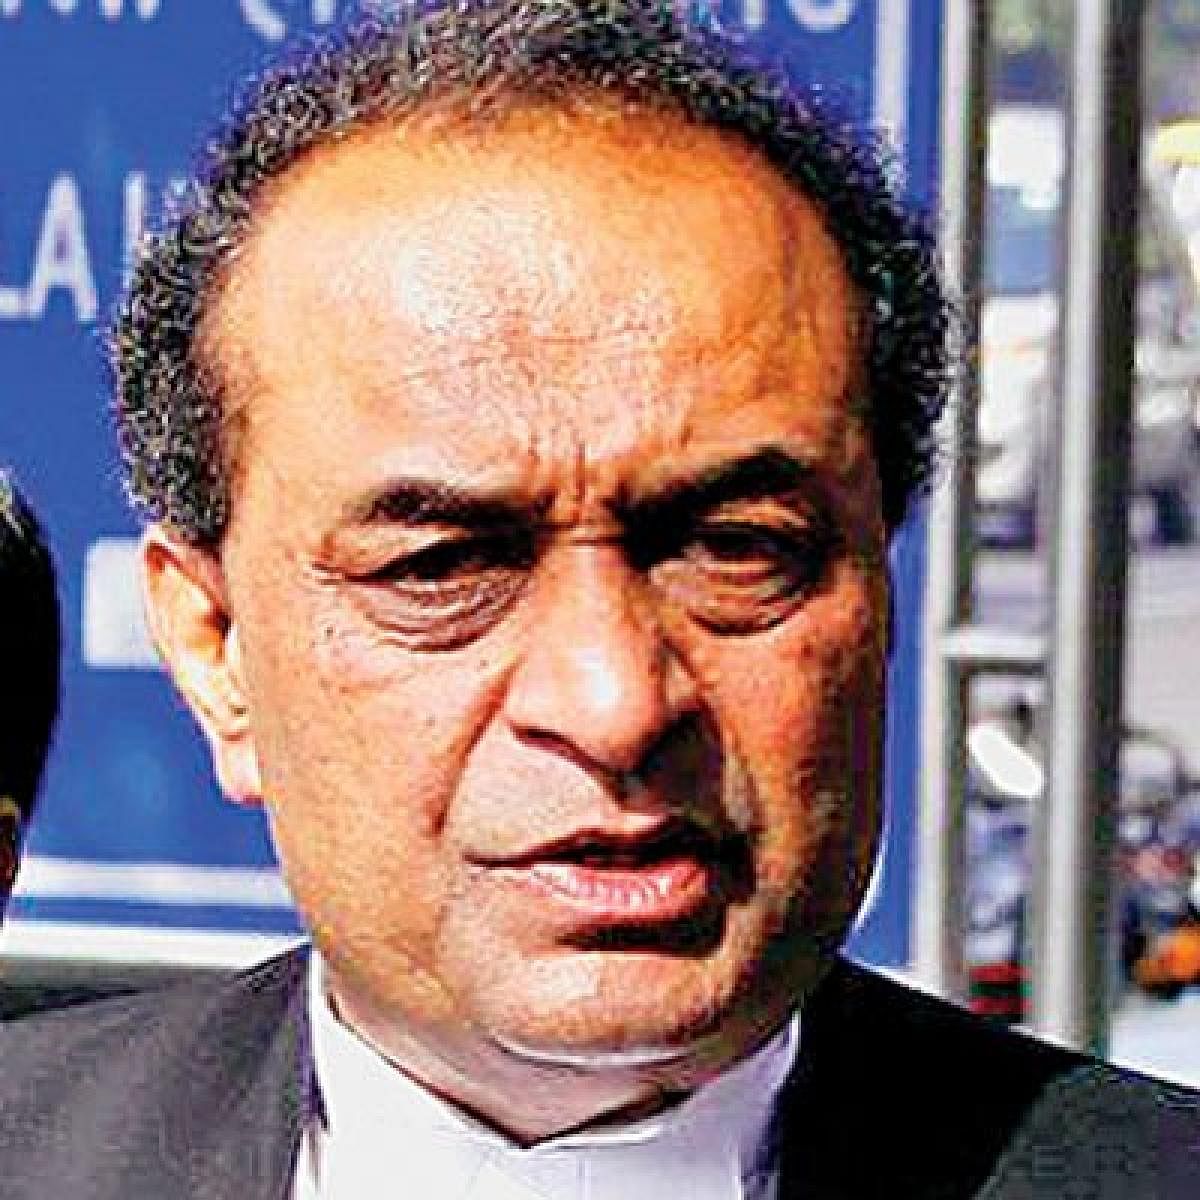 Senior advocate Mukul Rohatgi, who appeared for RCom chairman Anil Ambani in the contempt case, on Wednesday said he respects the decision of the Supreme Court and expressed confidence that the group will honour the directions on payment of dues to Ericss